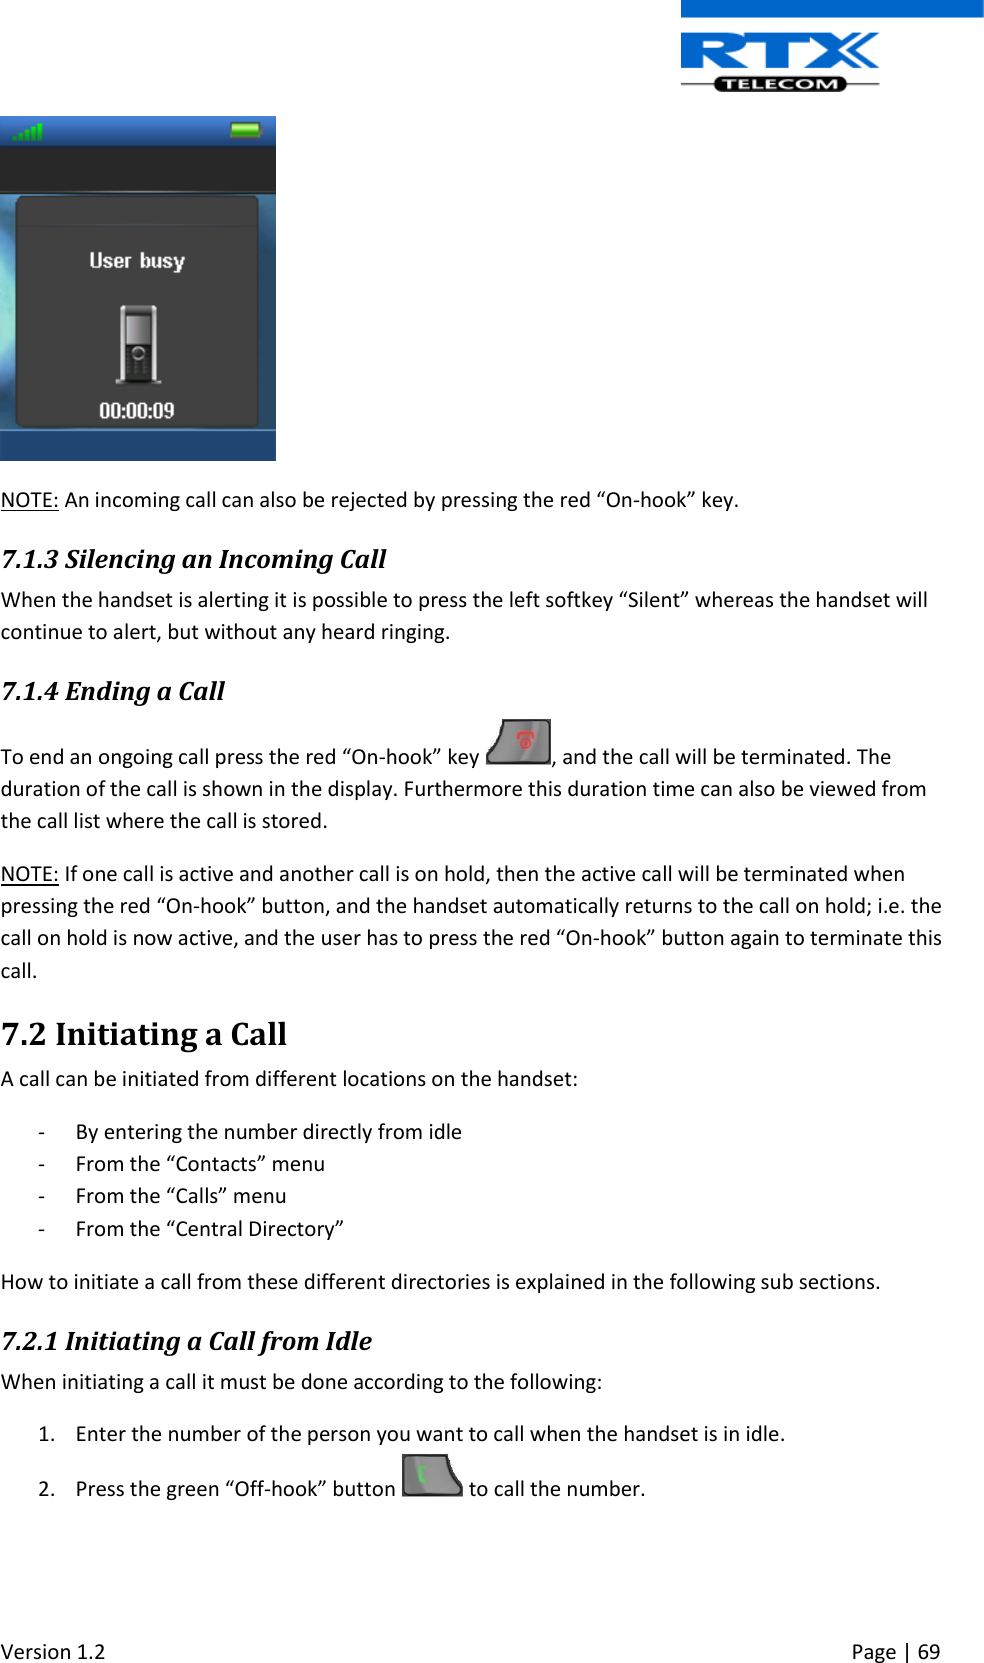  Version 1.2     Page | 69    NOTE: An incoming call can also be rejected by pressing the red “On-hook” key. 7.1.3 Silencing an Incoming Call When the handset is alerting it is possible to press the left softkey “Silent” whereas the handset will continue to alert, but without any heard ringing.  7.1.4 Ending a Call To end an ongoing call press the red “On-hook” key  , and the call will be terminated. The duration of the call is shown in the display. Furthermore this duration time can also be viewed from the call list where the call is stored. NOTE: If one call is active and another call is on hold, then the active call will be terminated when pressing the red “On-hook” button, and the handset automatically returns to the call on hold; i.e. the call on hold is now active, and the user has to press the red “On-hook” button again to terminate this call.  7.2 Initiating a Call A call can be initiated from different locations on the handset:  - By entering the number directly from idle - From the “Contacts” menu - From the “Calls” menu - From the “Central Directory” How to initiate a call from these different directories is explained in the following sub sections. 7.2.1 Initiating a Call from Idle When initiating a call it must be done according to the following: 1. Enter the number of the person you want to call when the handset is in idle. 2. Press the green “Off-hook” button   to call the number. 